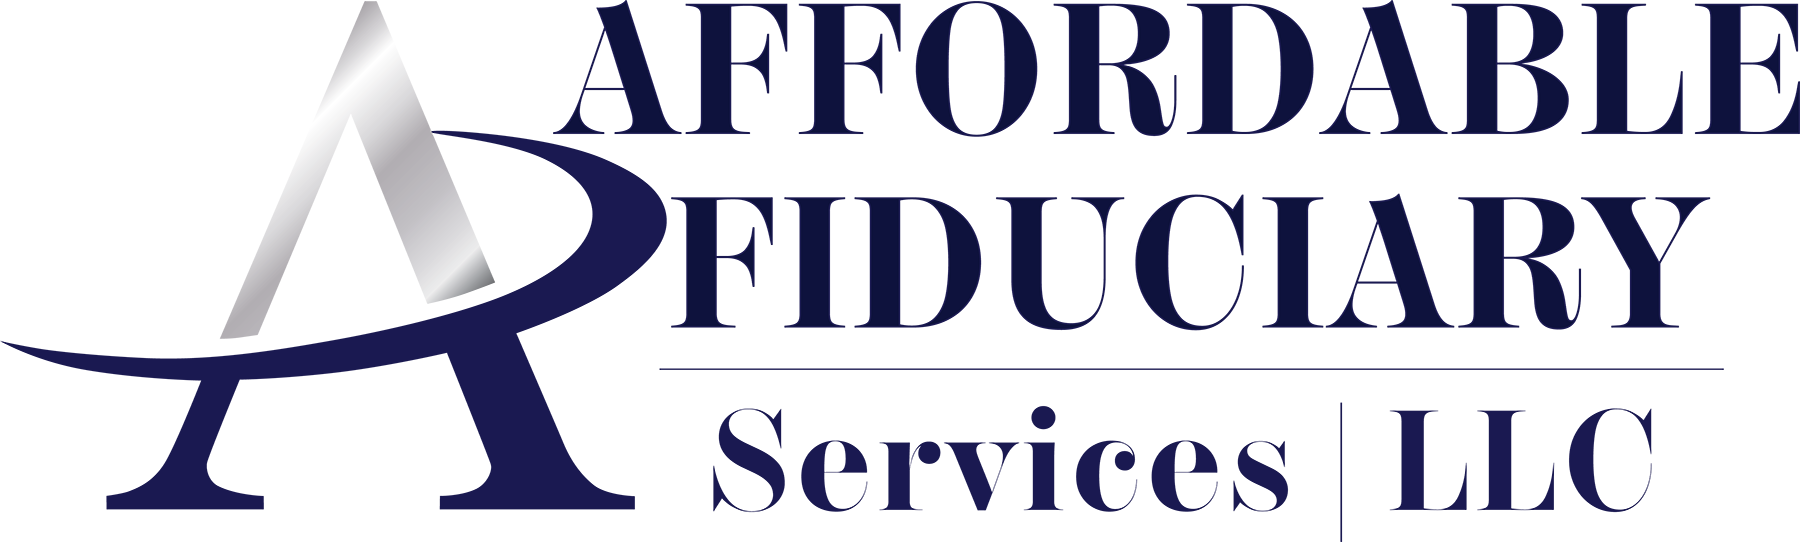 Affordable Fiduciary Services Final Logo copy